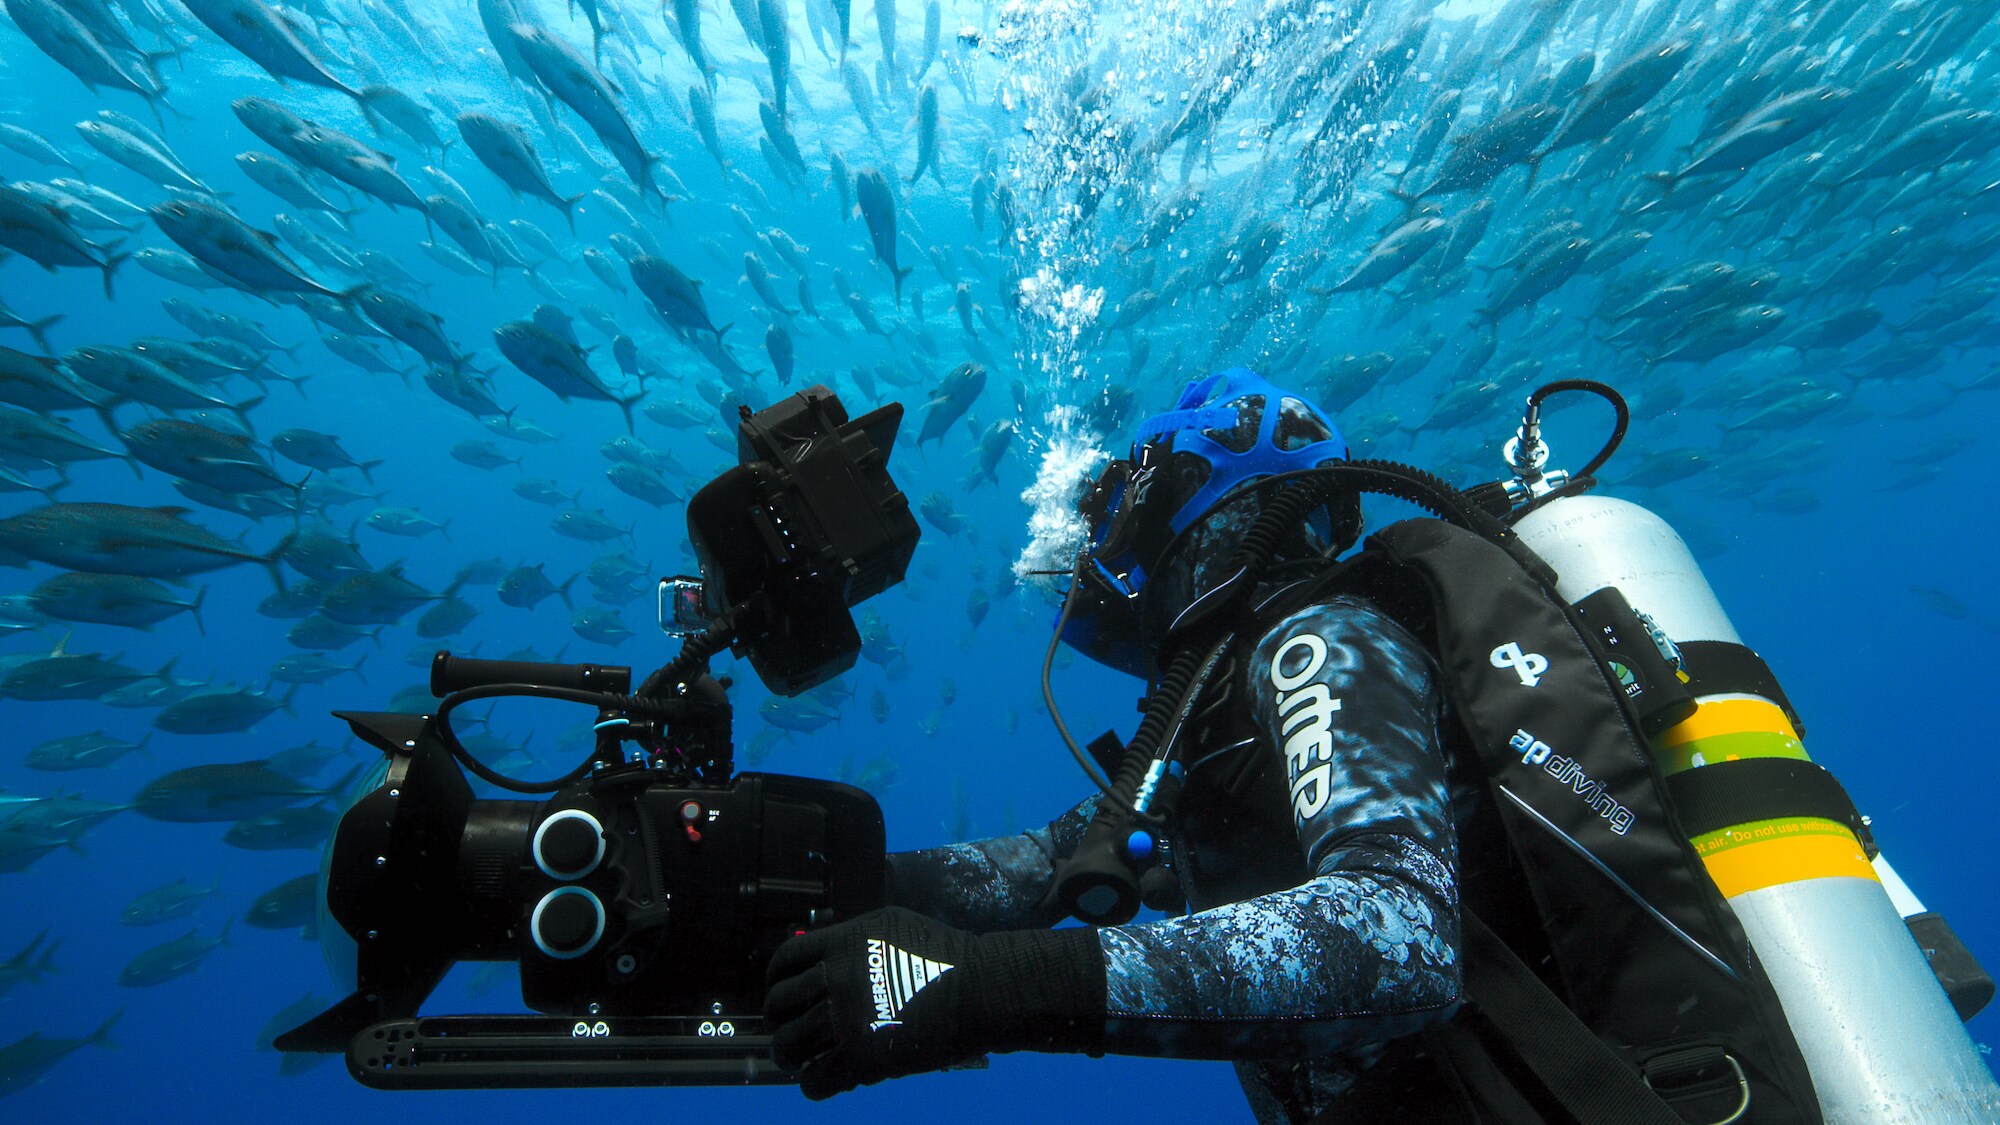 Bertie Gregory filming the rich waters around Cocos island. (Credit: National Geographic/Mark Sharman for Disney+)